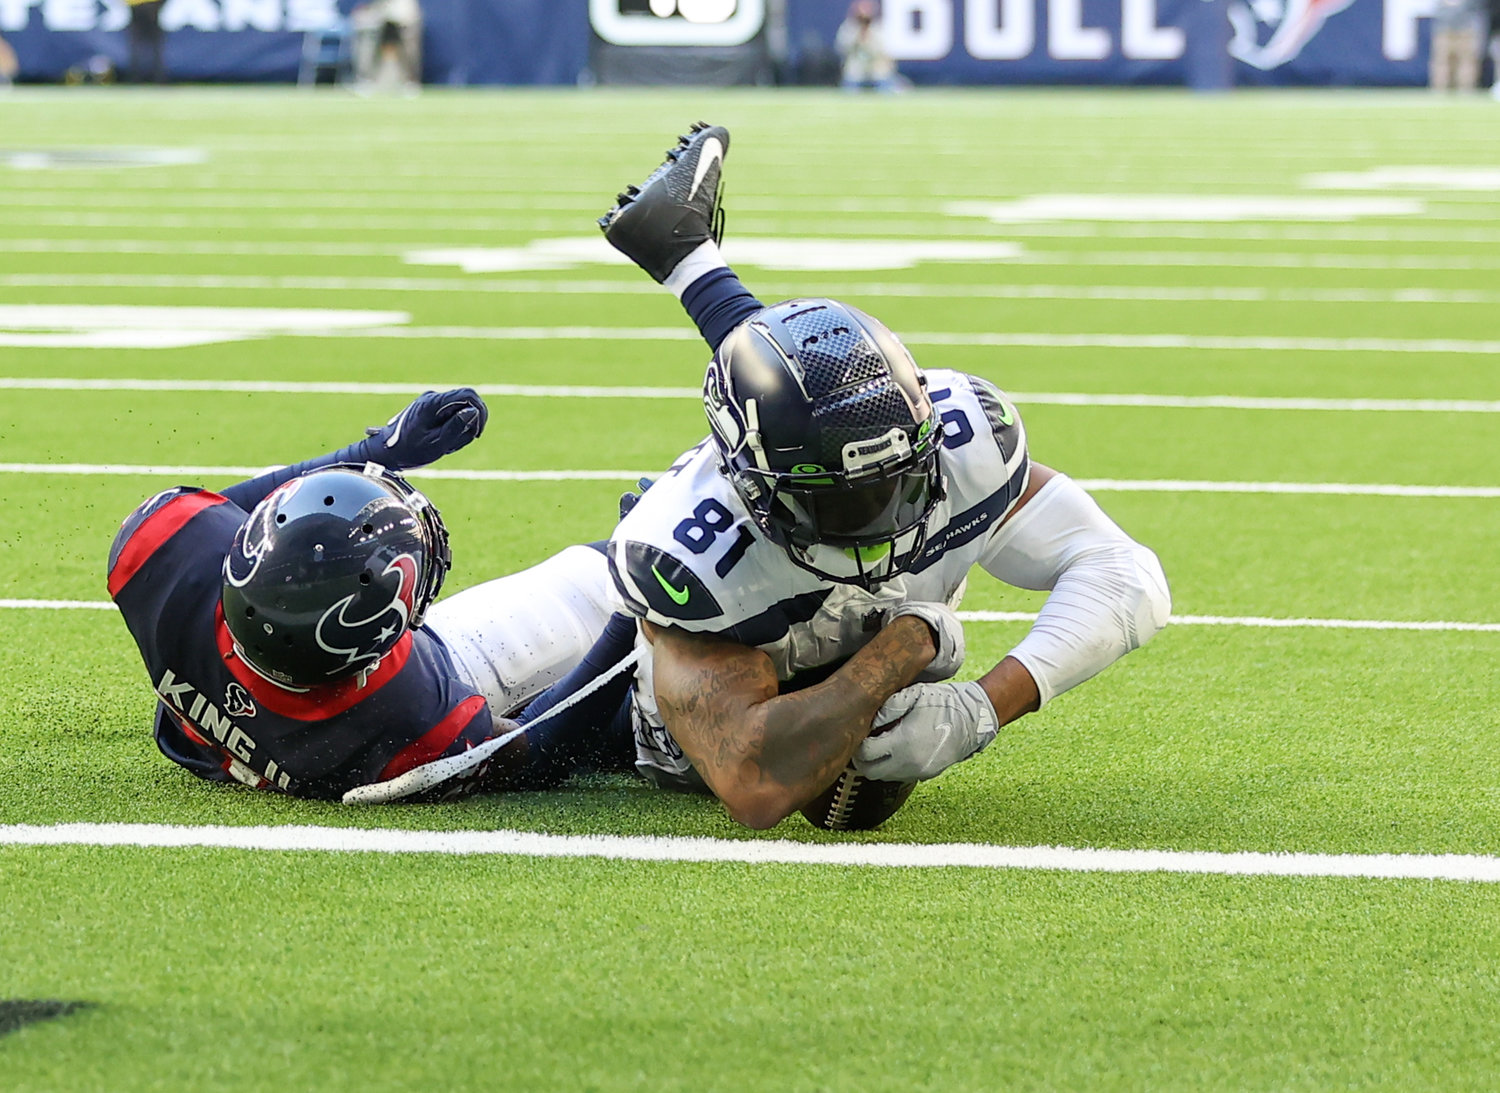 Seattle Seahawks tight end Gerald Everett (81) is tackled by Houston Texans cornerback Desmond King II (25) on a play that was ruled a Seattle touchdown during the second half of an NFL game between the Seahawks and the Texans on December 12, 2021 in Houston, Texas.